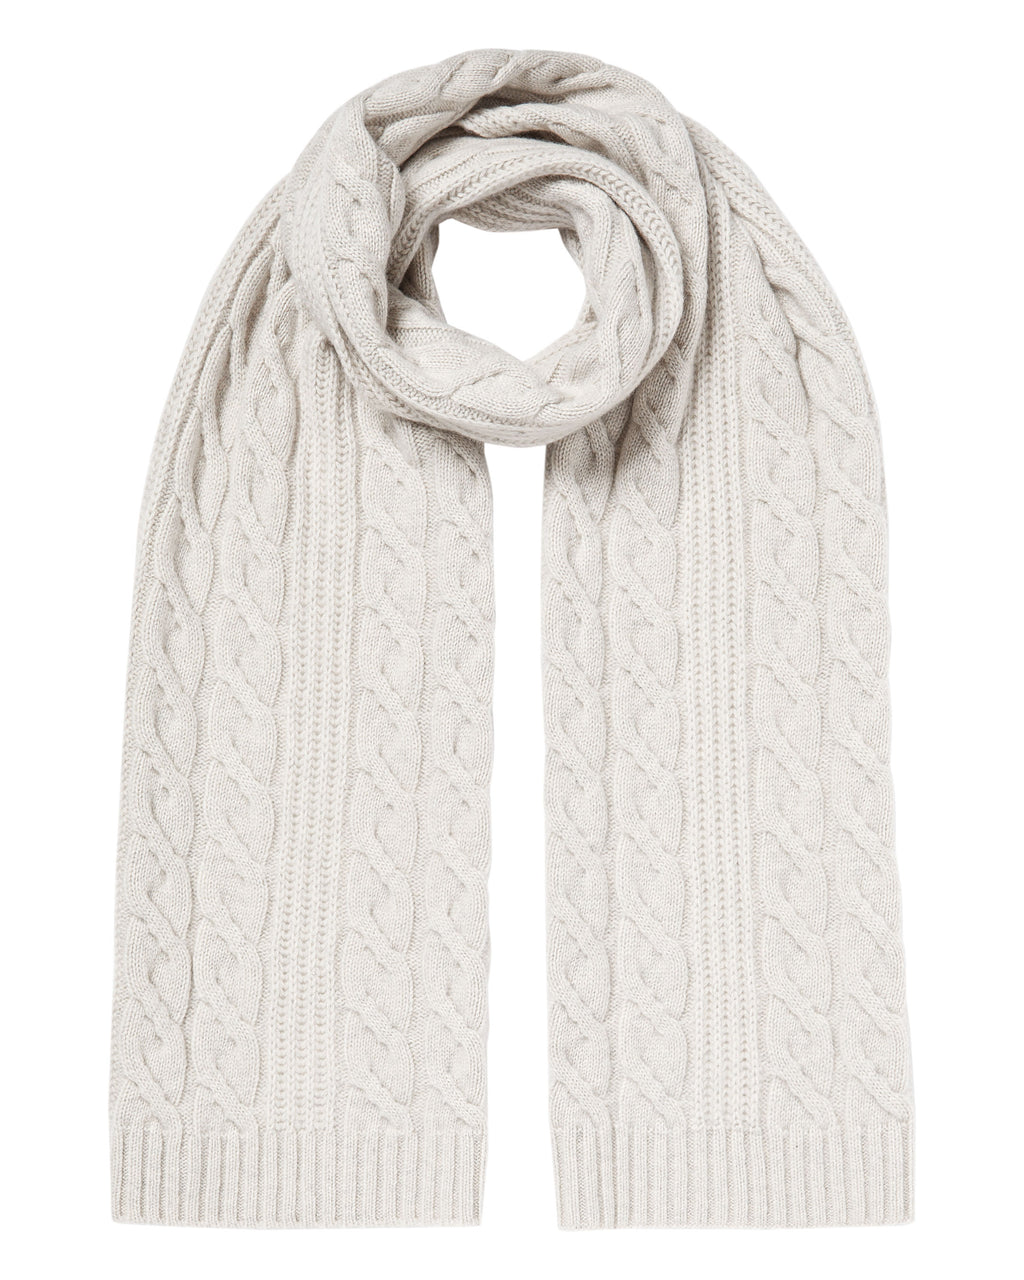 N.Peal Women's Wide Cable Cashmere Scarf New Ivory White